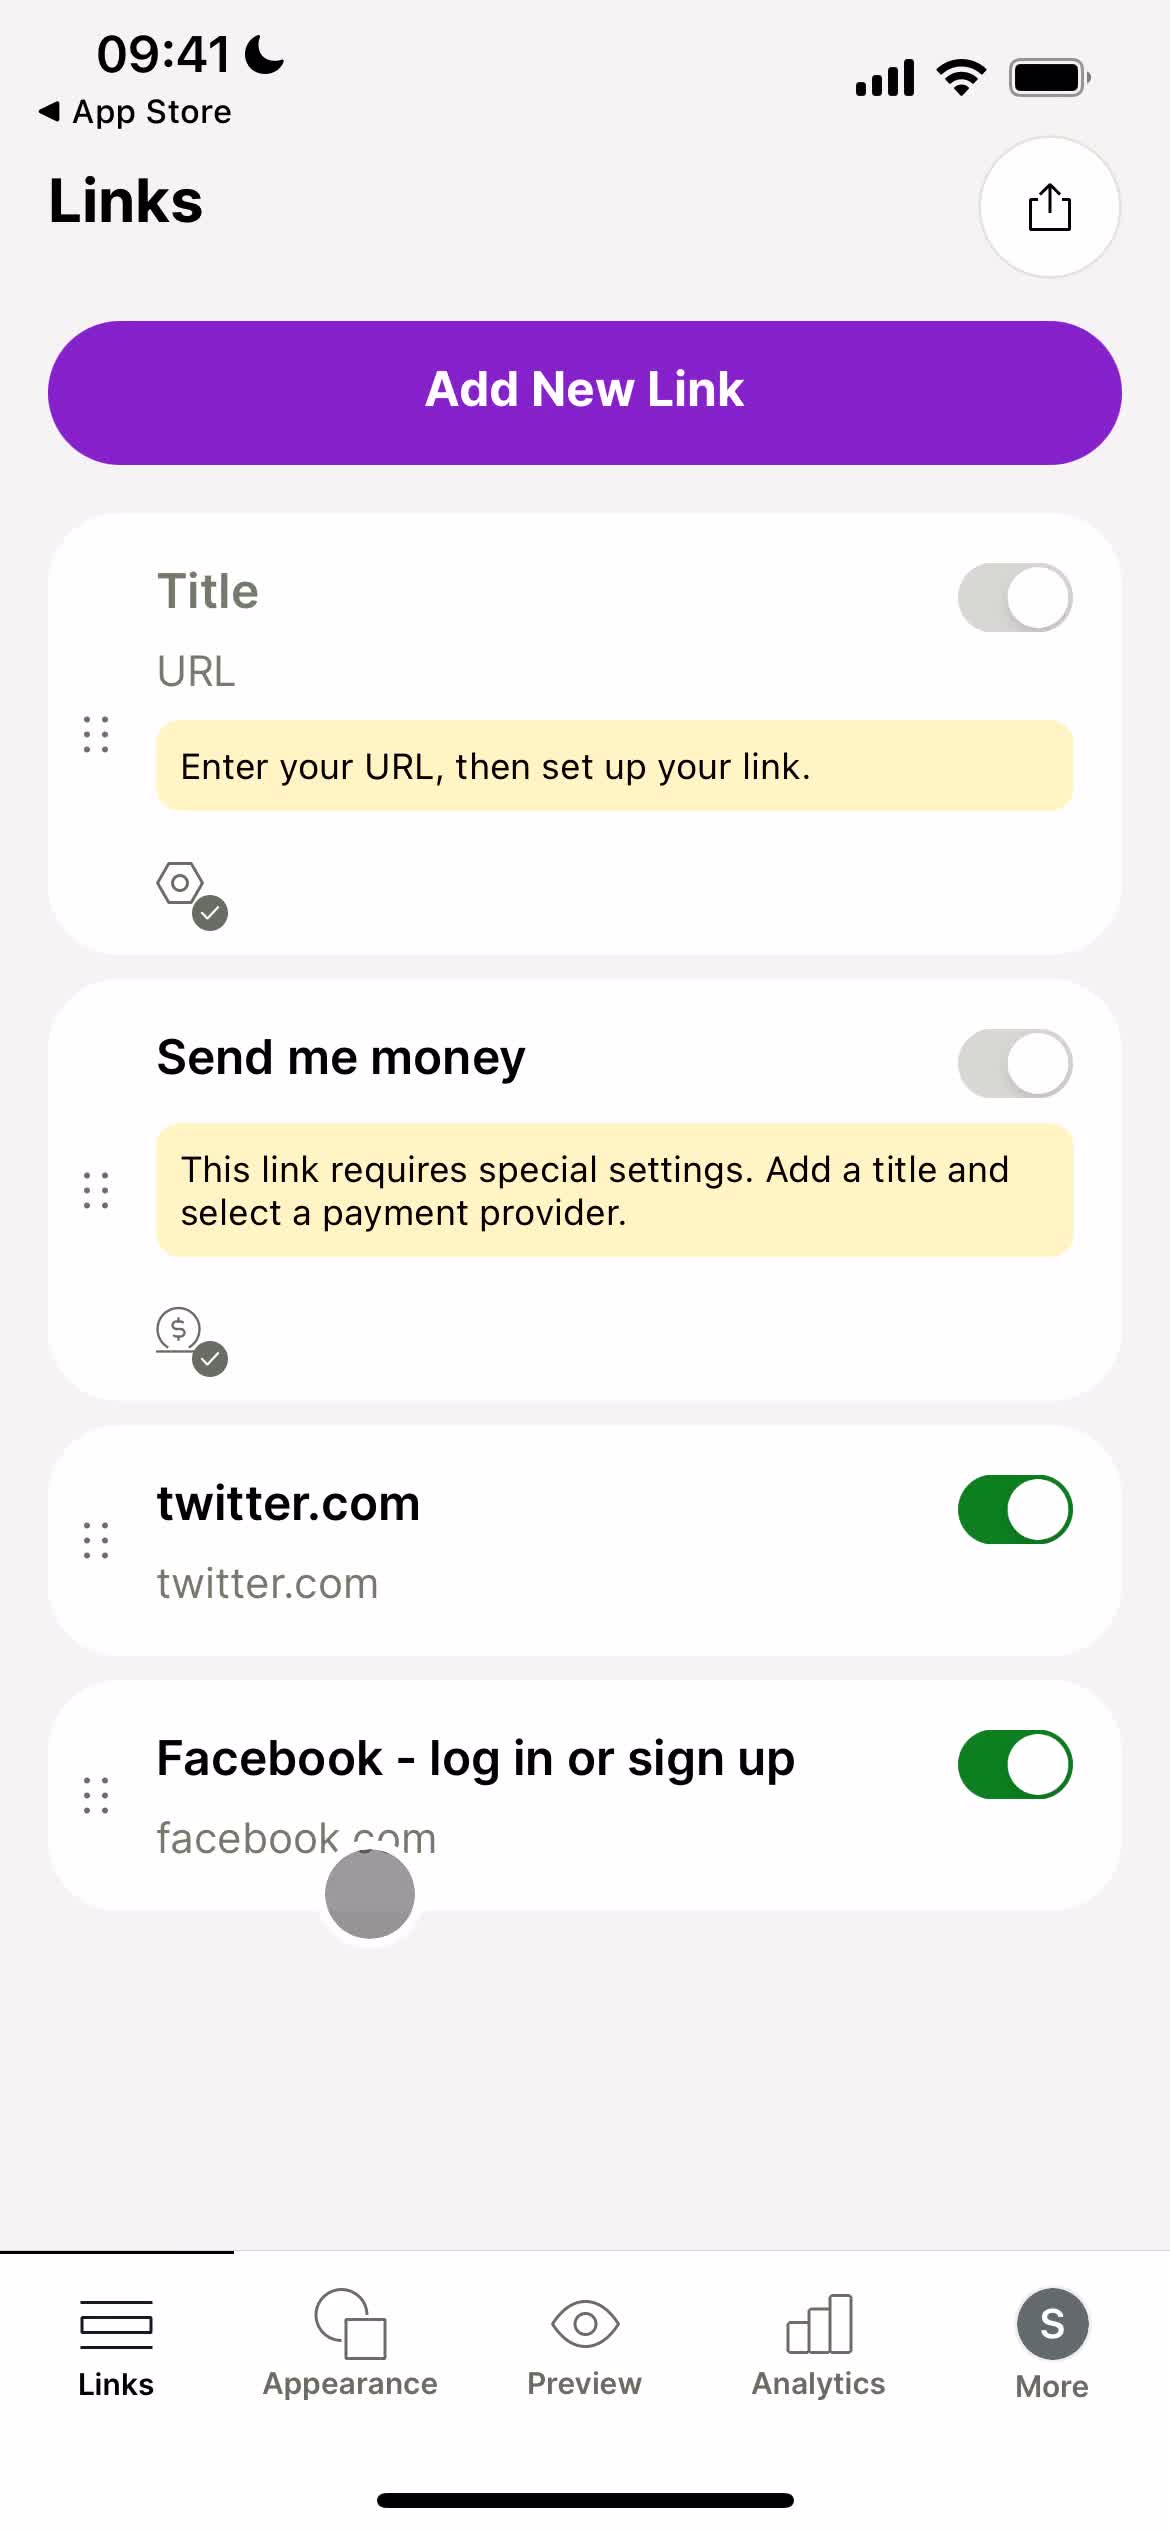 Screenshot of Links on Upgrading your account on Linktree user flow